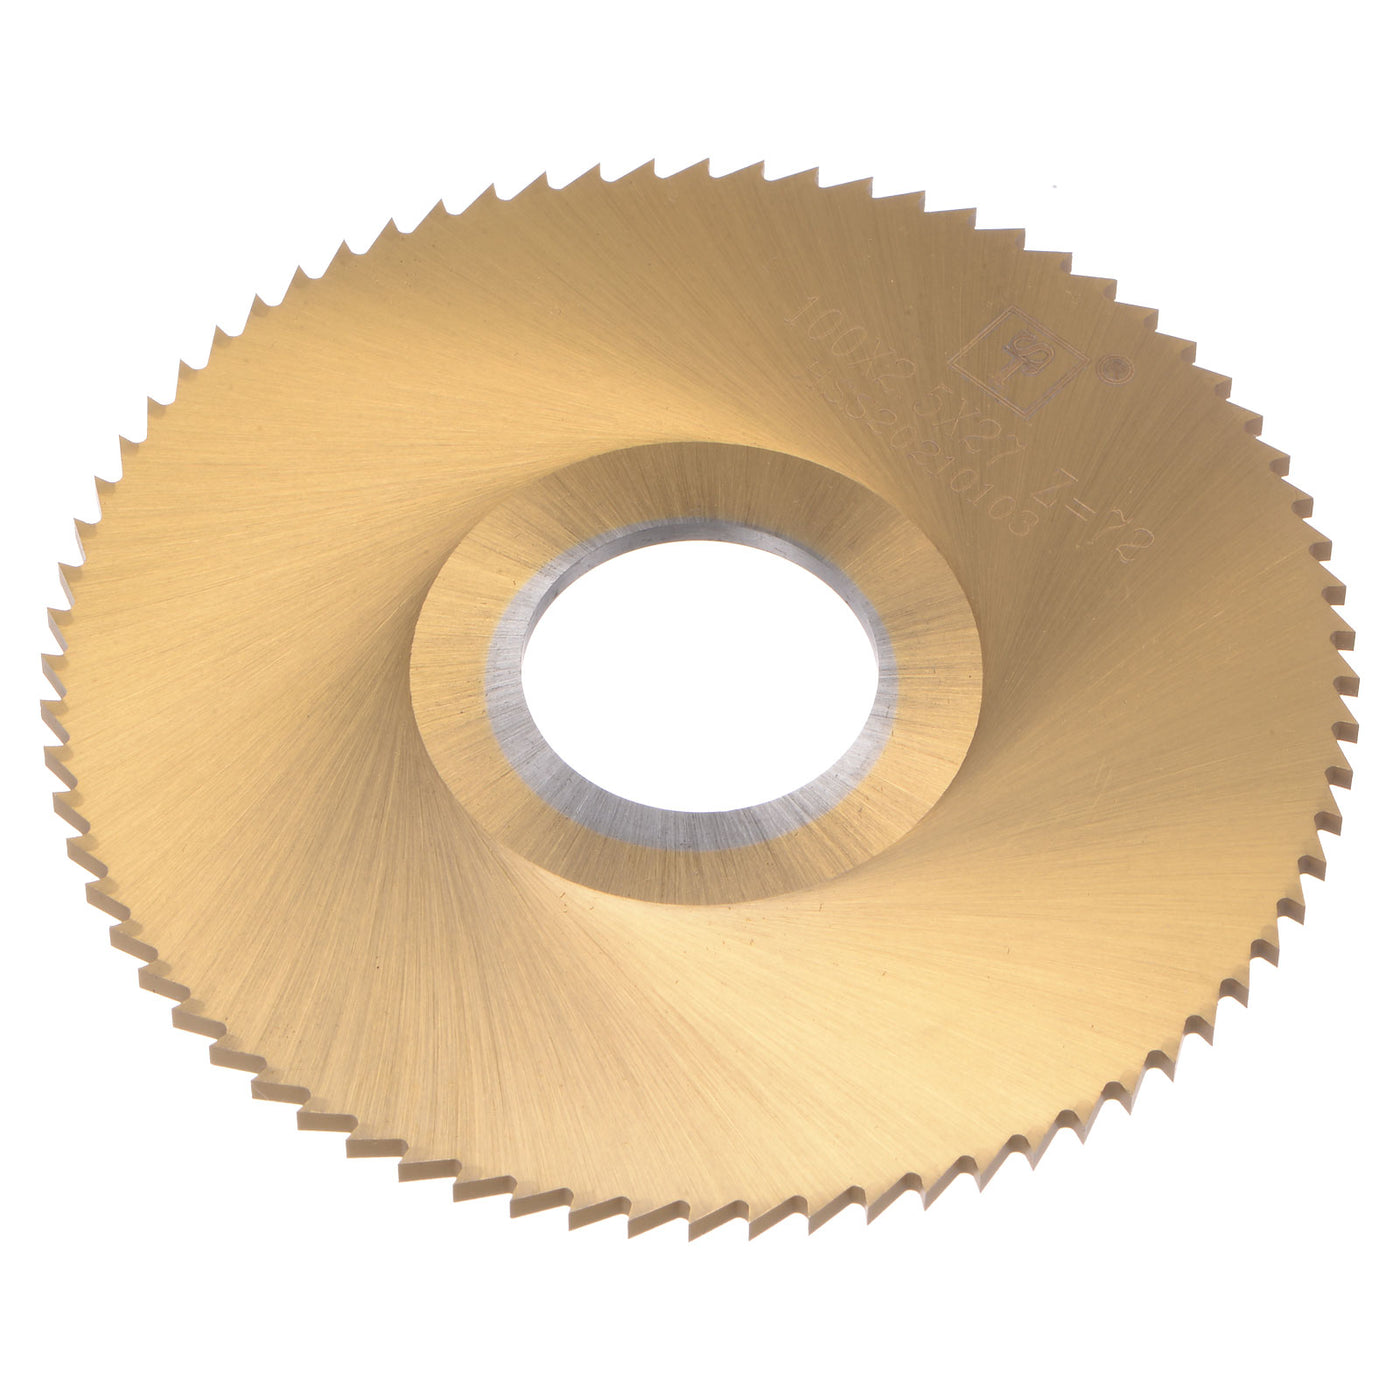 Uxcell Uxcell 100mm Dia 27mm Arbor 2.5mm Thick 72 Tooth Titanium Coated Circular Saw Blade